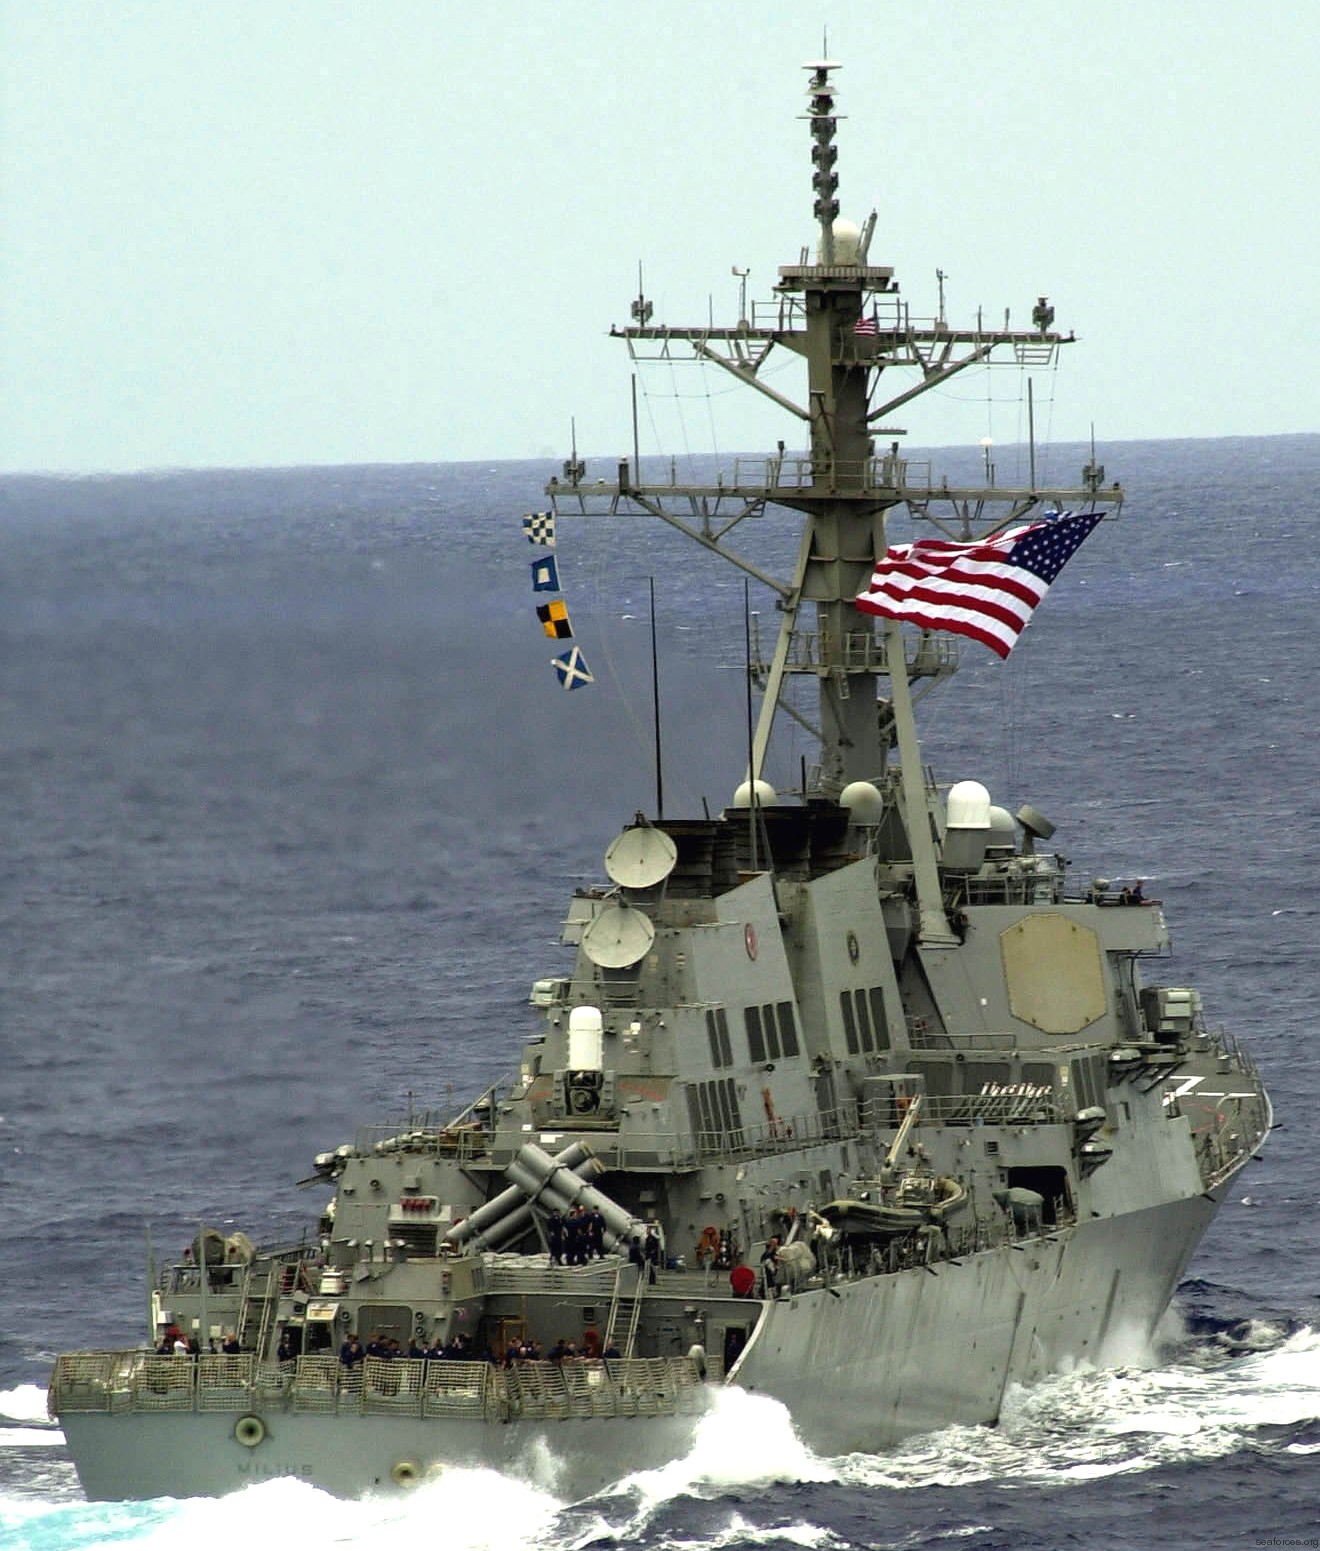 ddg-69 uss milius guided missile destroyer arleigh burke class aegis bmd 36